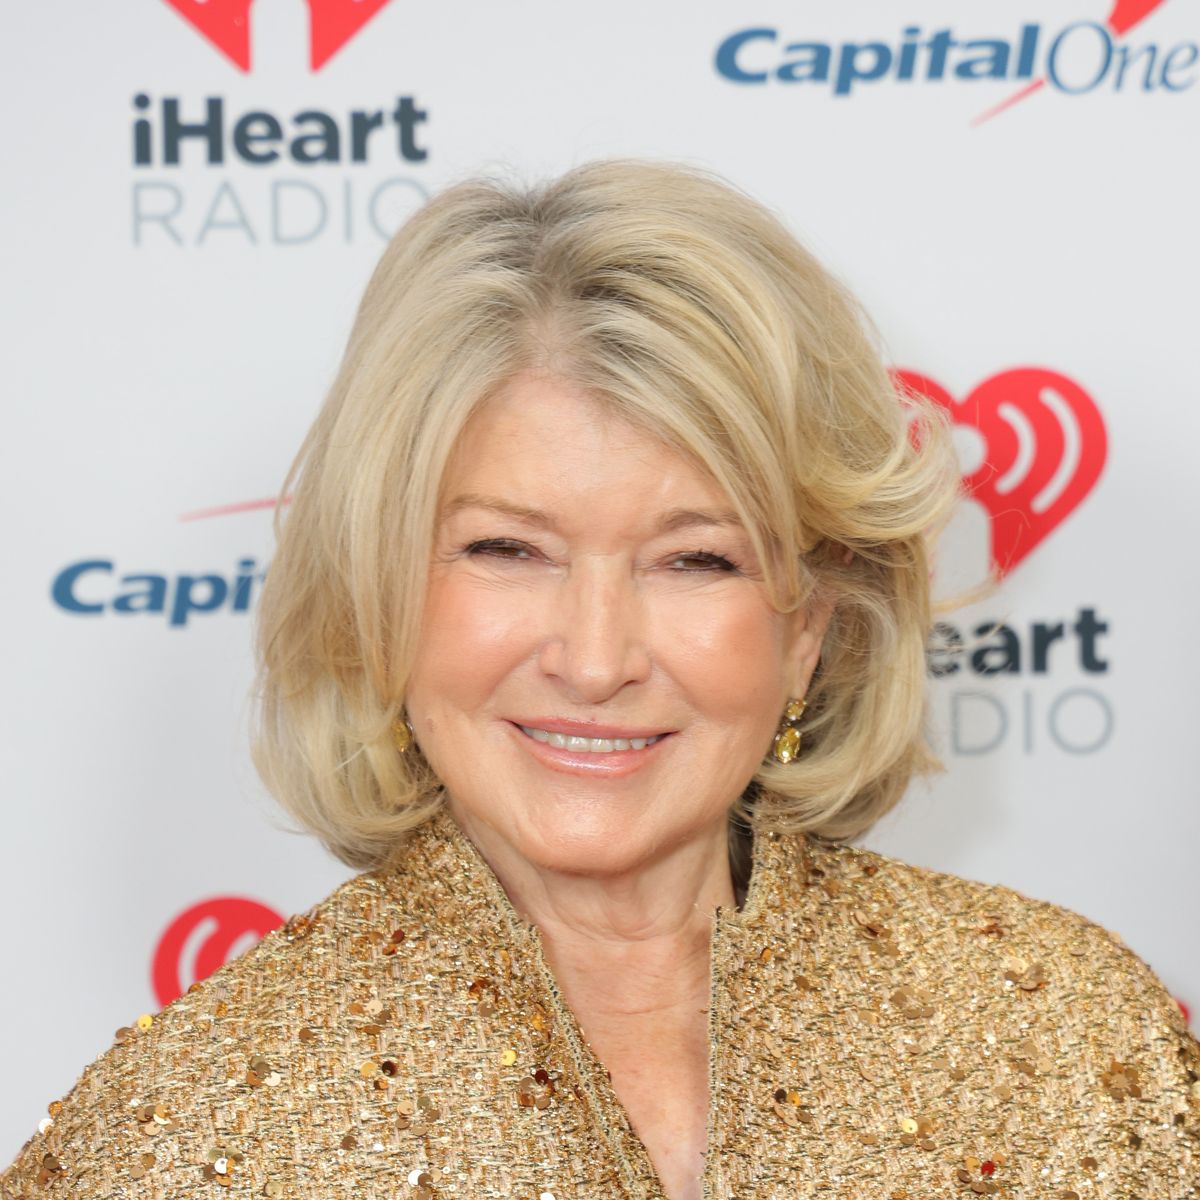 Martha Stewart, 82, Gets Real About Her Use of Botox and Fillers